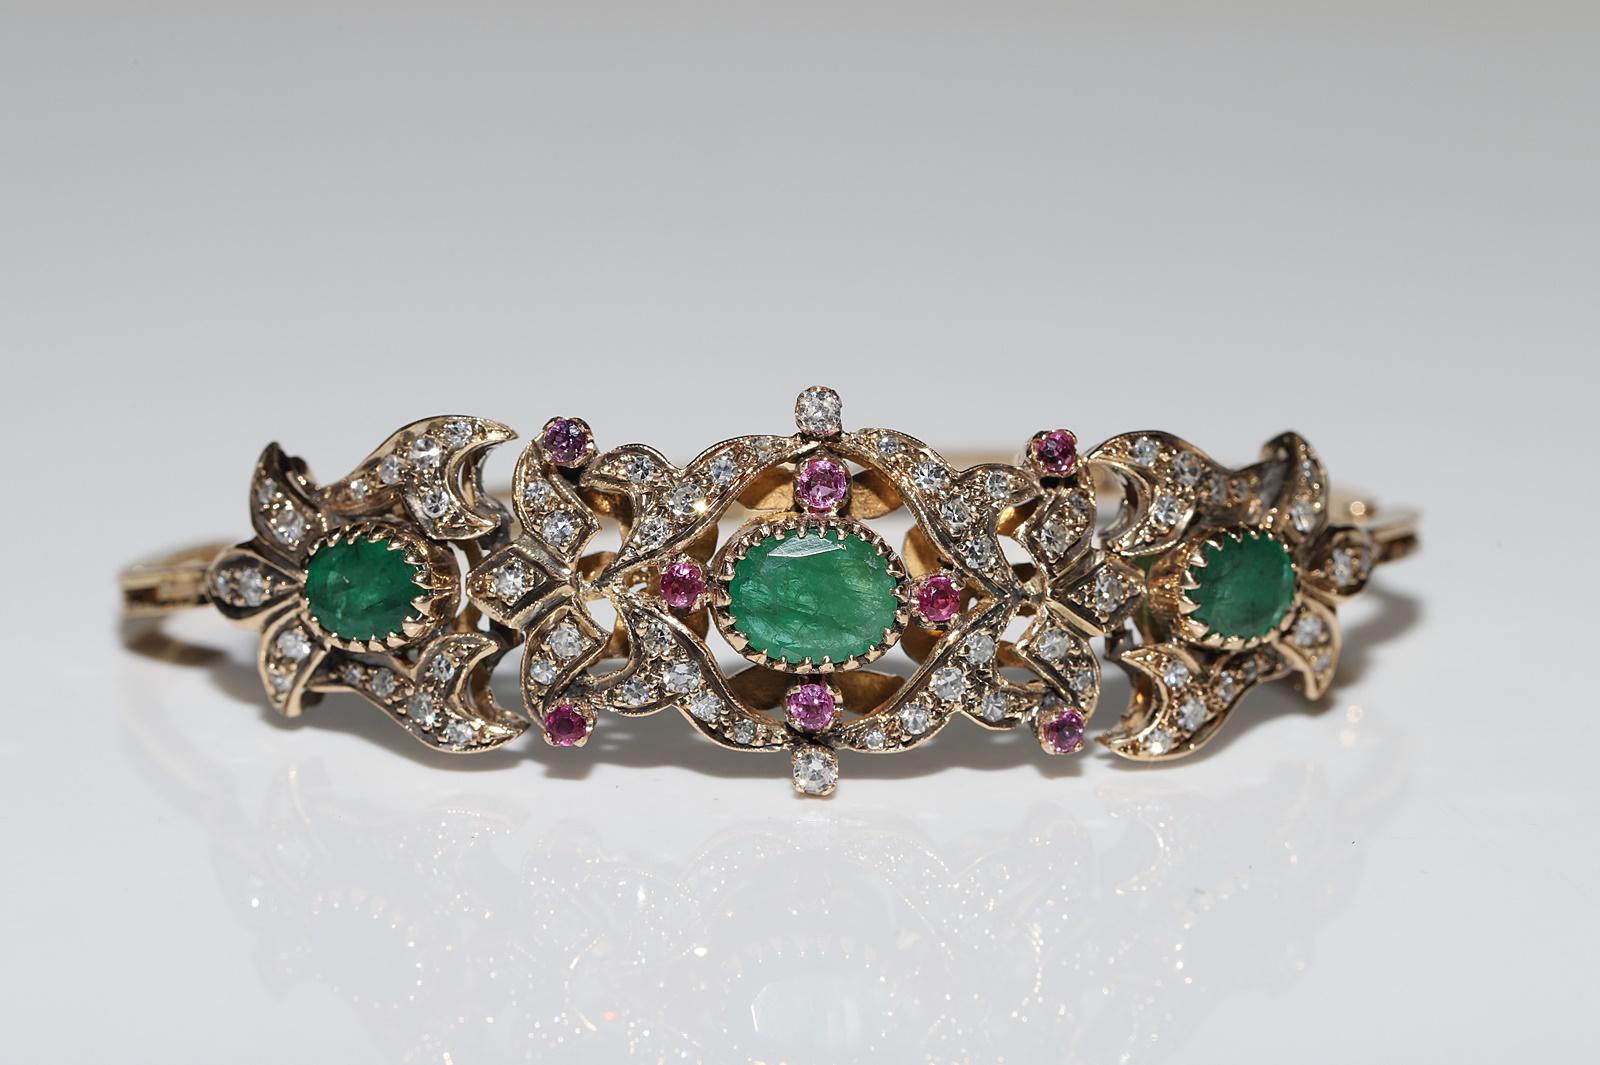 Vintage Circa 1960s 14k Gold Natural Diamond And Emerald And Ruby Bracelet For Sale 2